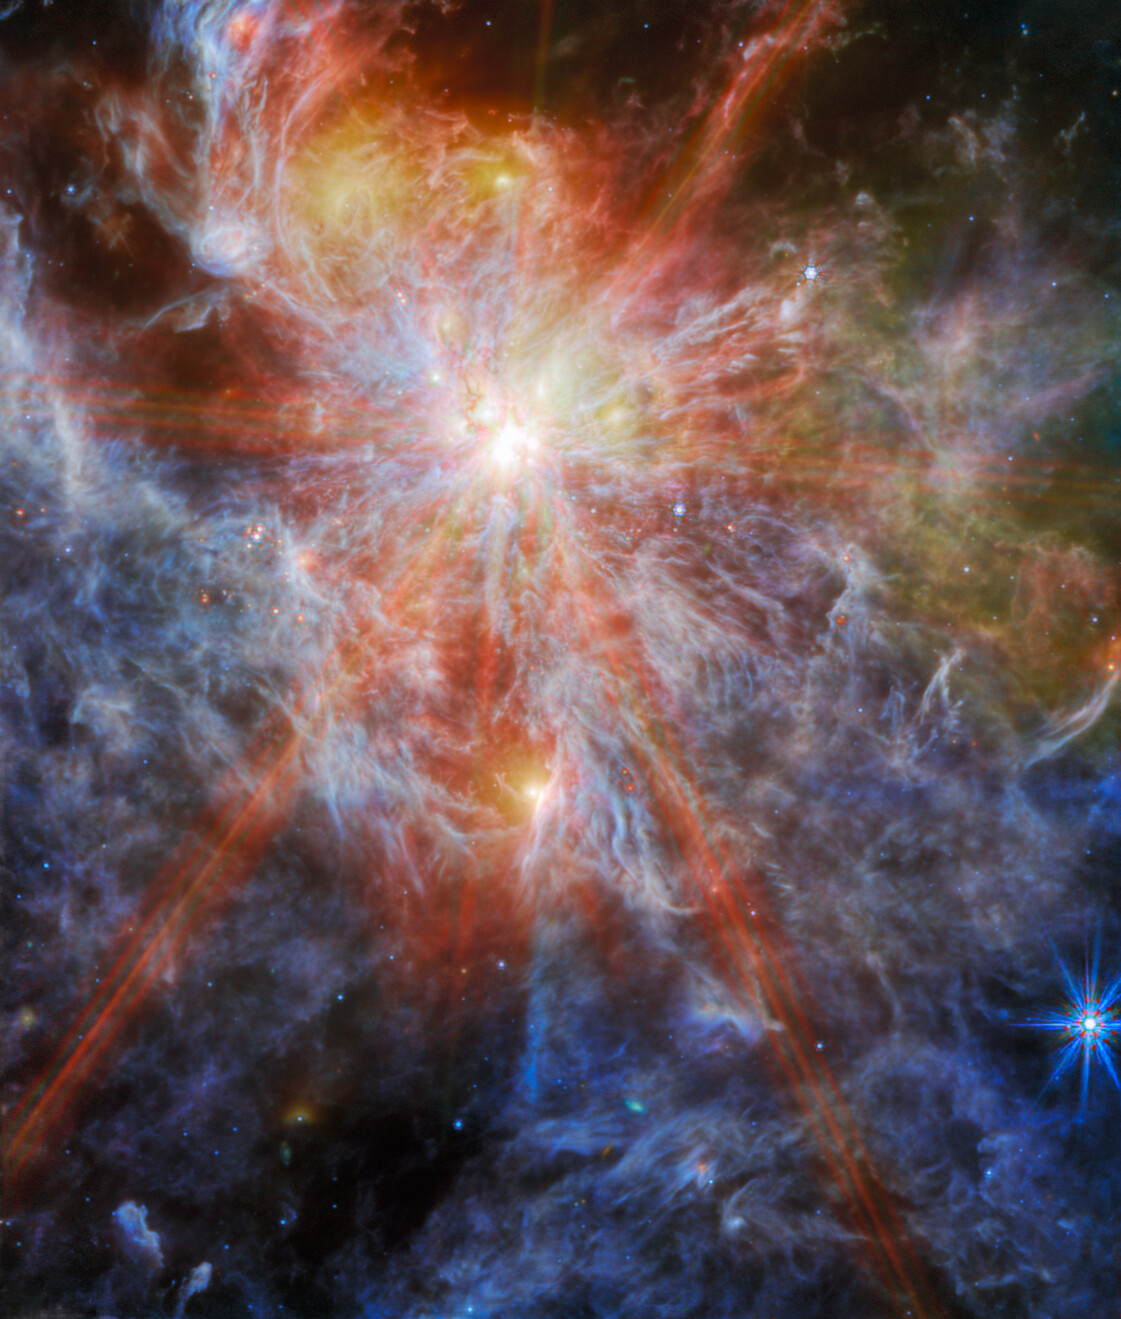 A bright young star, located in the upper left quadrant, shines through layers of wispy white and blue clouds on a dark background.  The star is surrounded by thick orange points in an eight-pointed pattern, spanning most of the image.  A patch of greenish-yellow clouds appears at the top right of the image.  There are a few other bright spots visible as glowing yellow dots among the clouds, as well as another bright star with smaller blue diffraction peaks in the lower right corner.